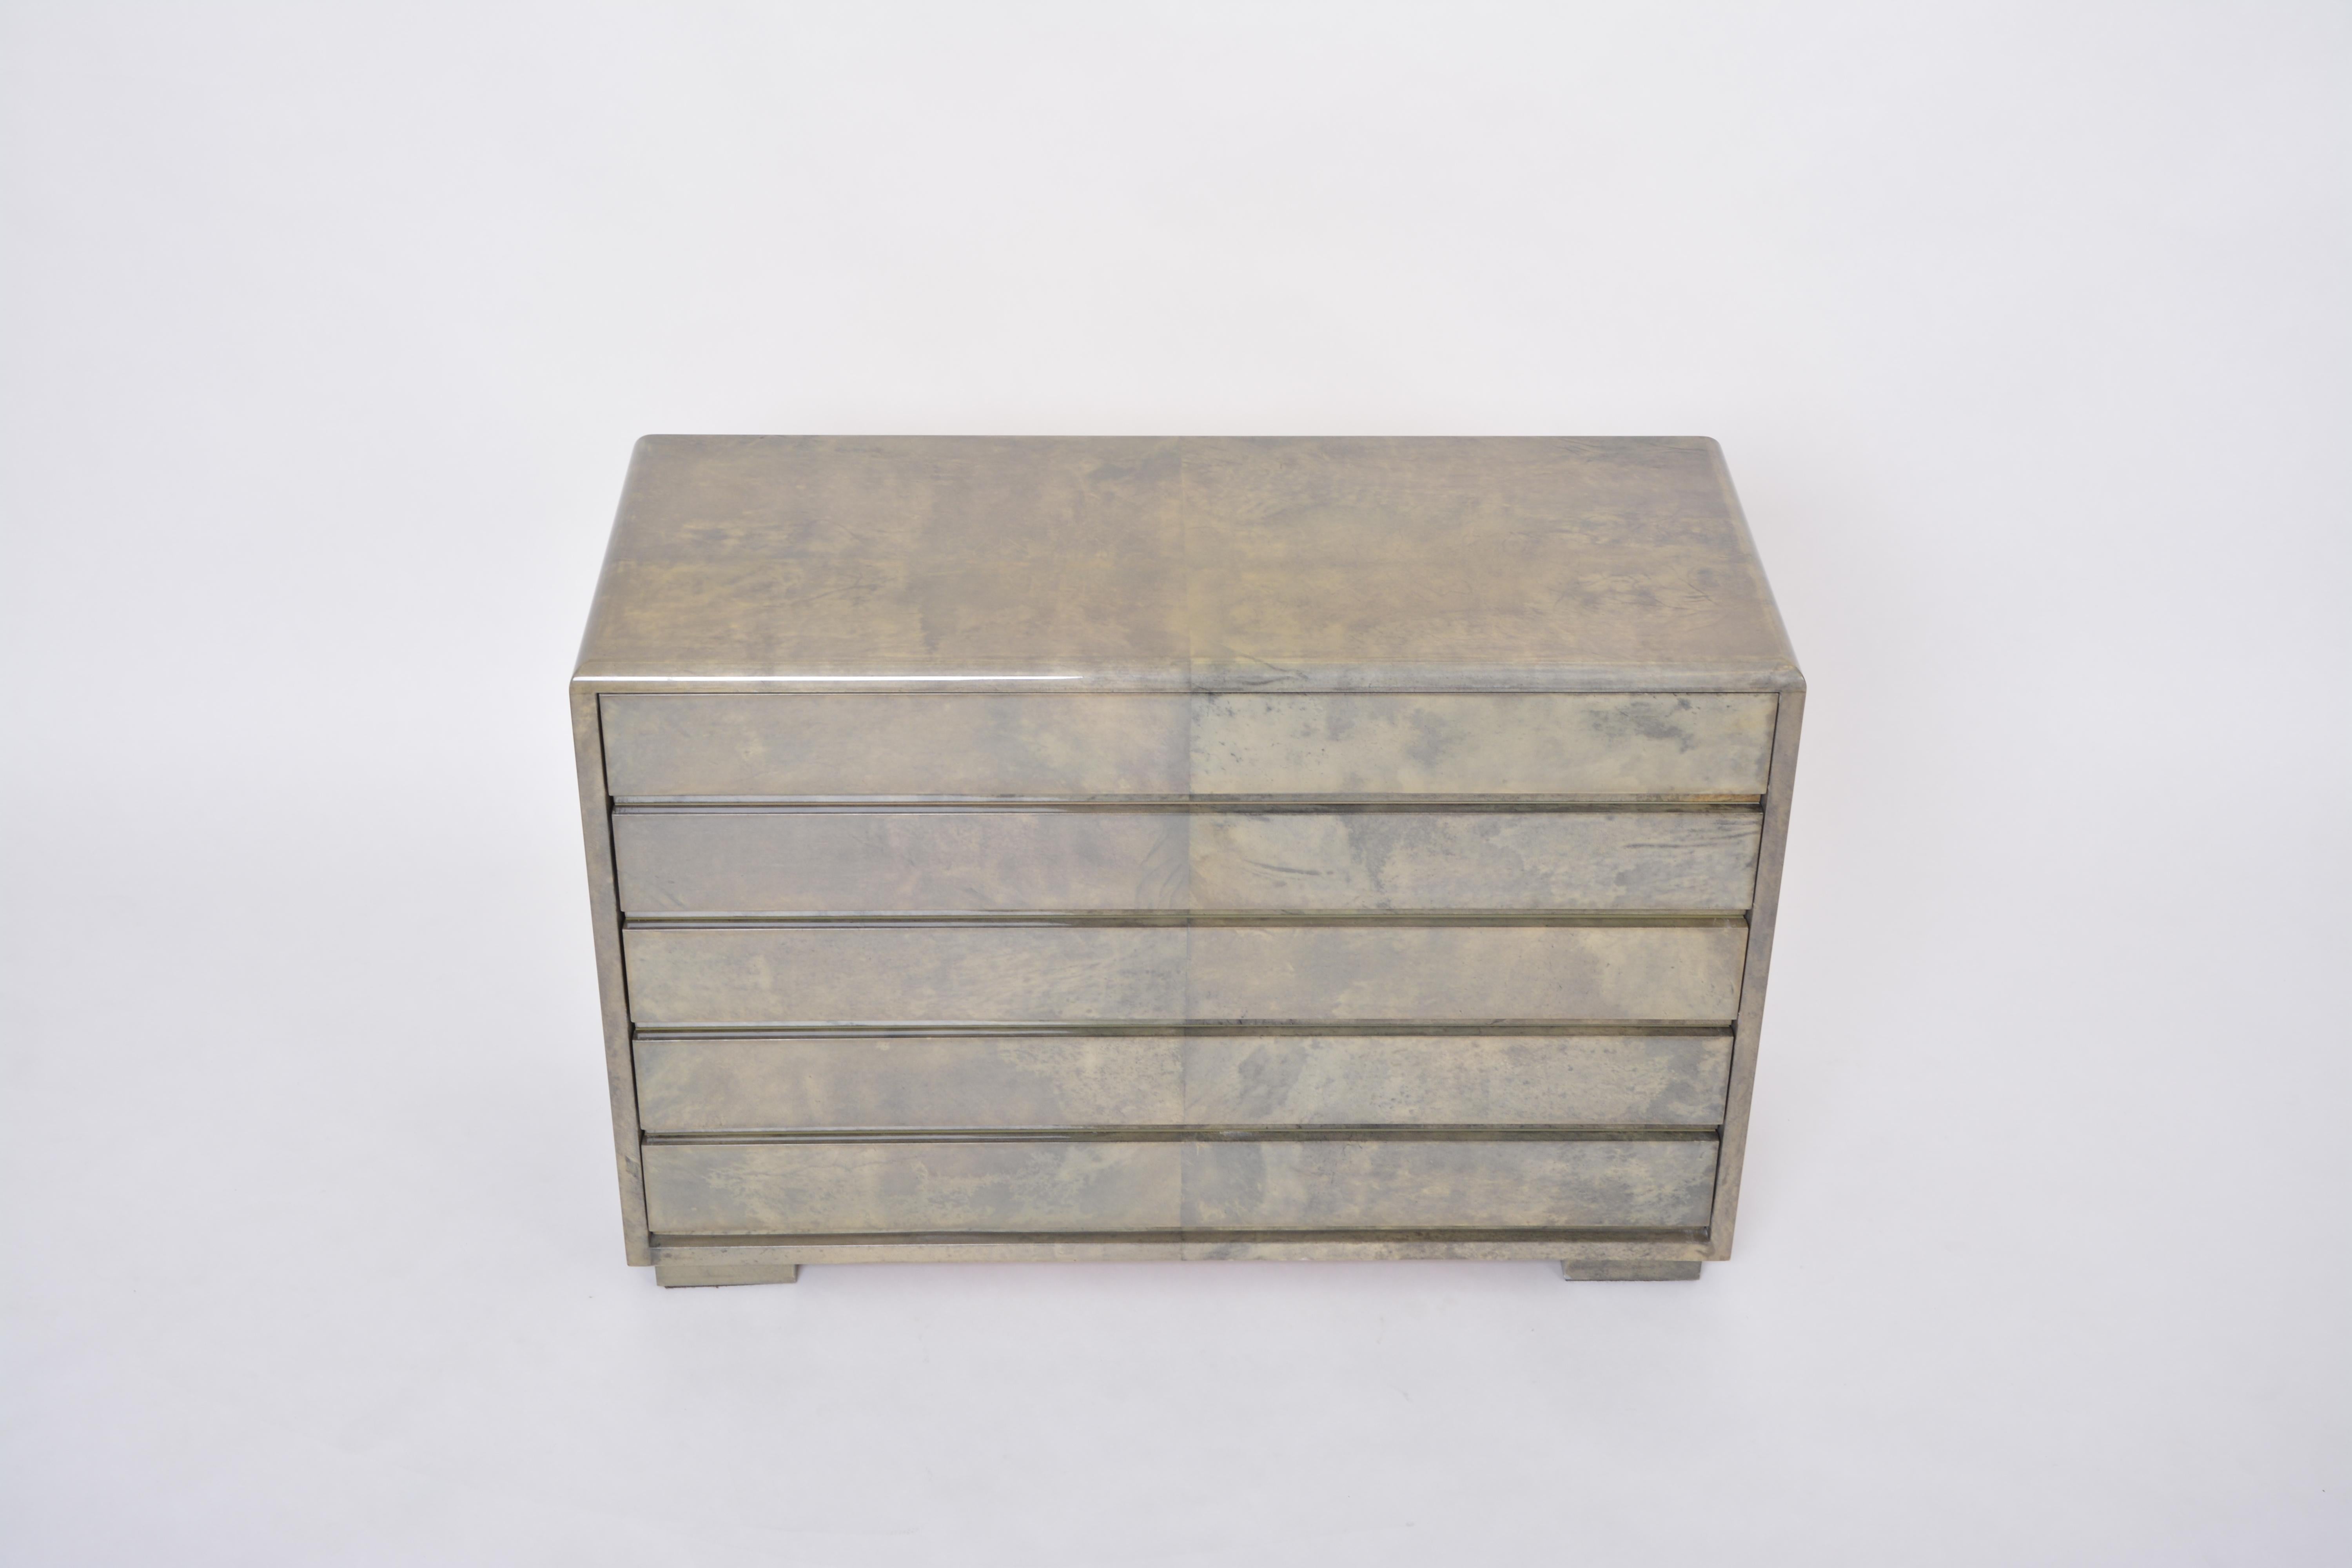 Italian Mid-Century Modern Chest of drawers made of laquered Goat Skin by Aldo Tura